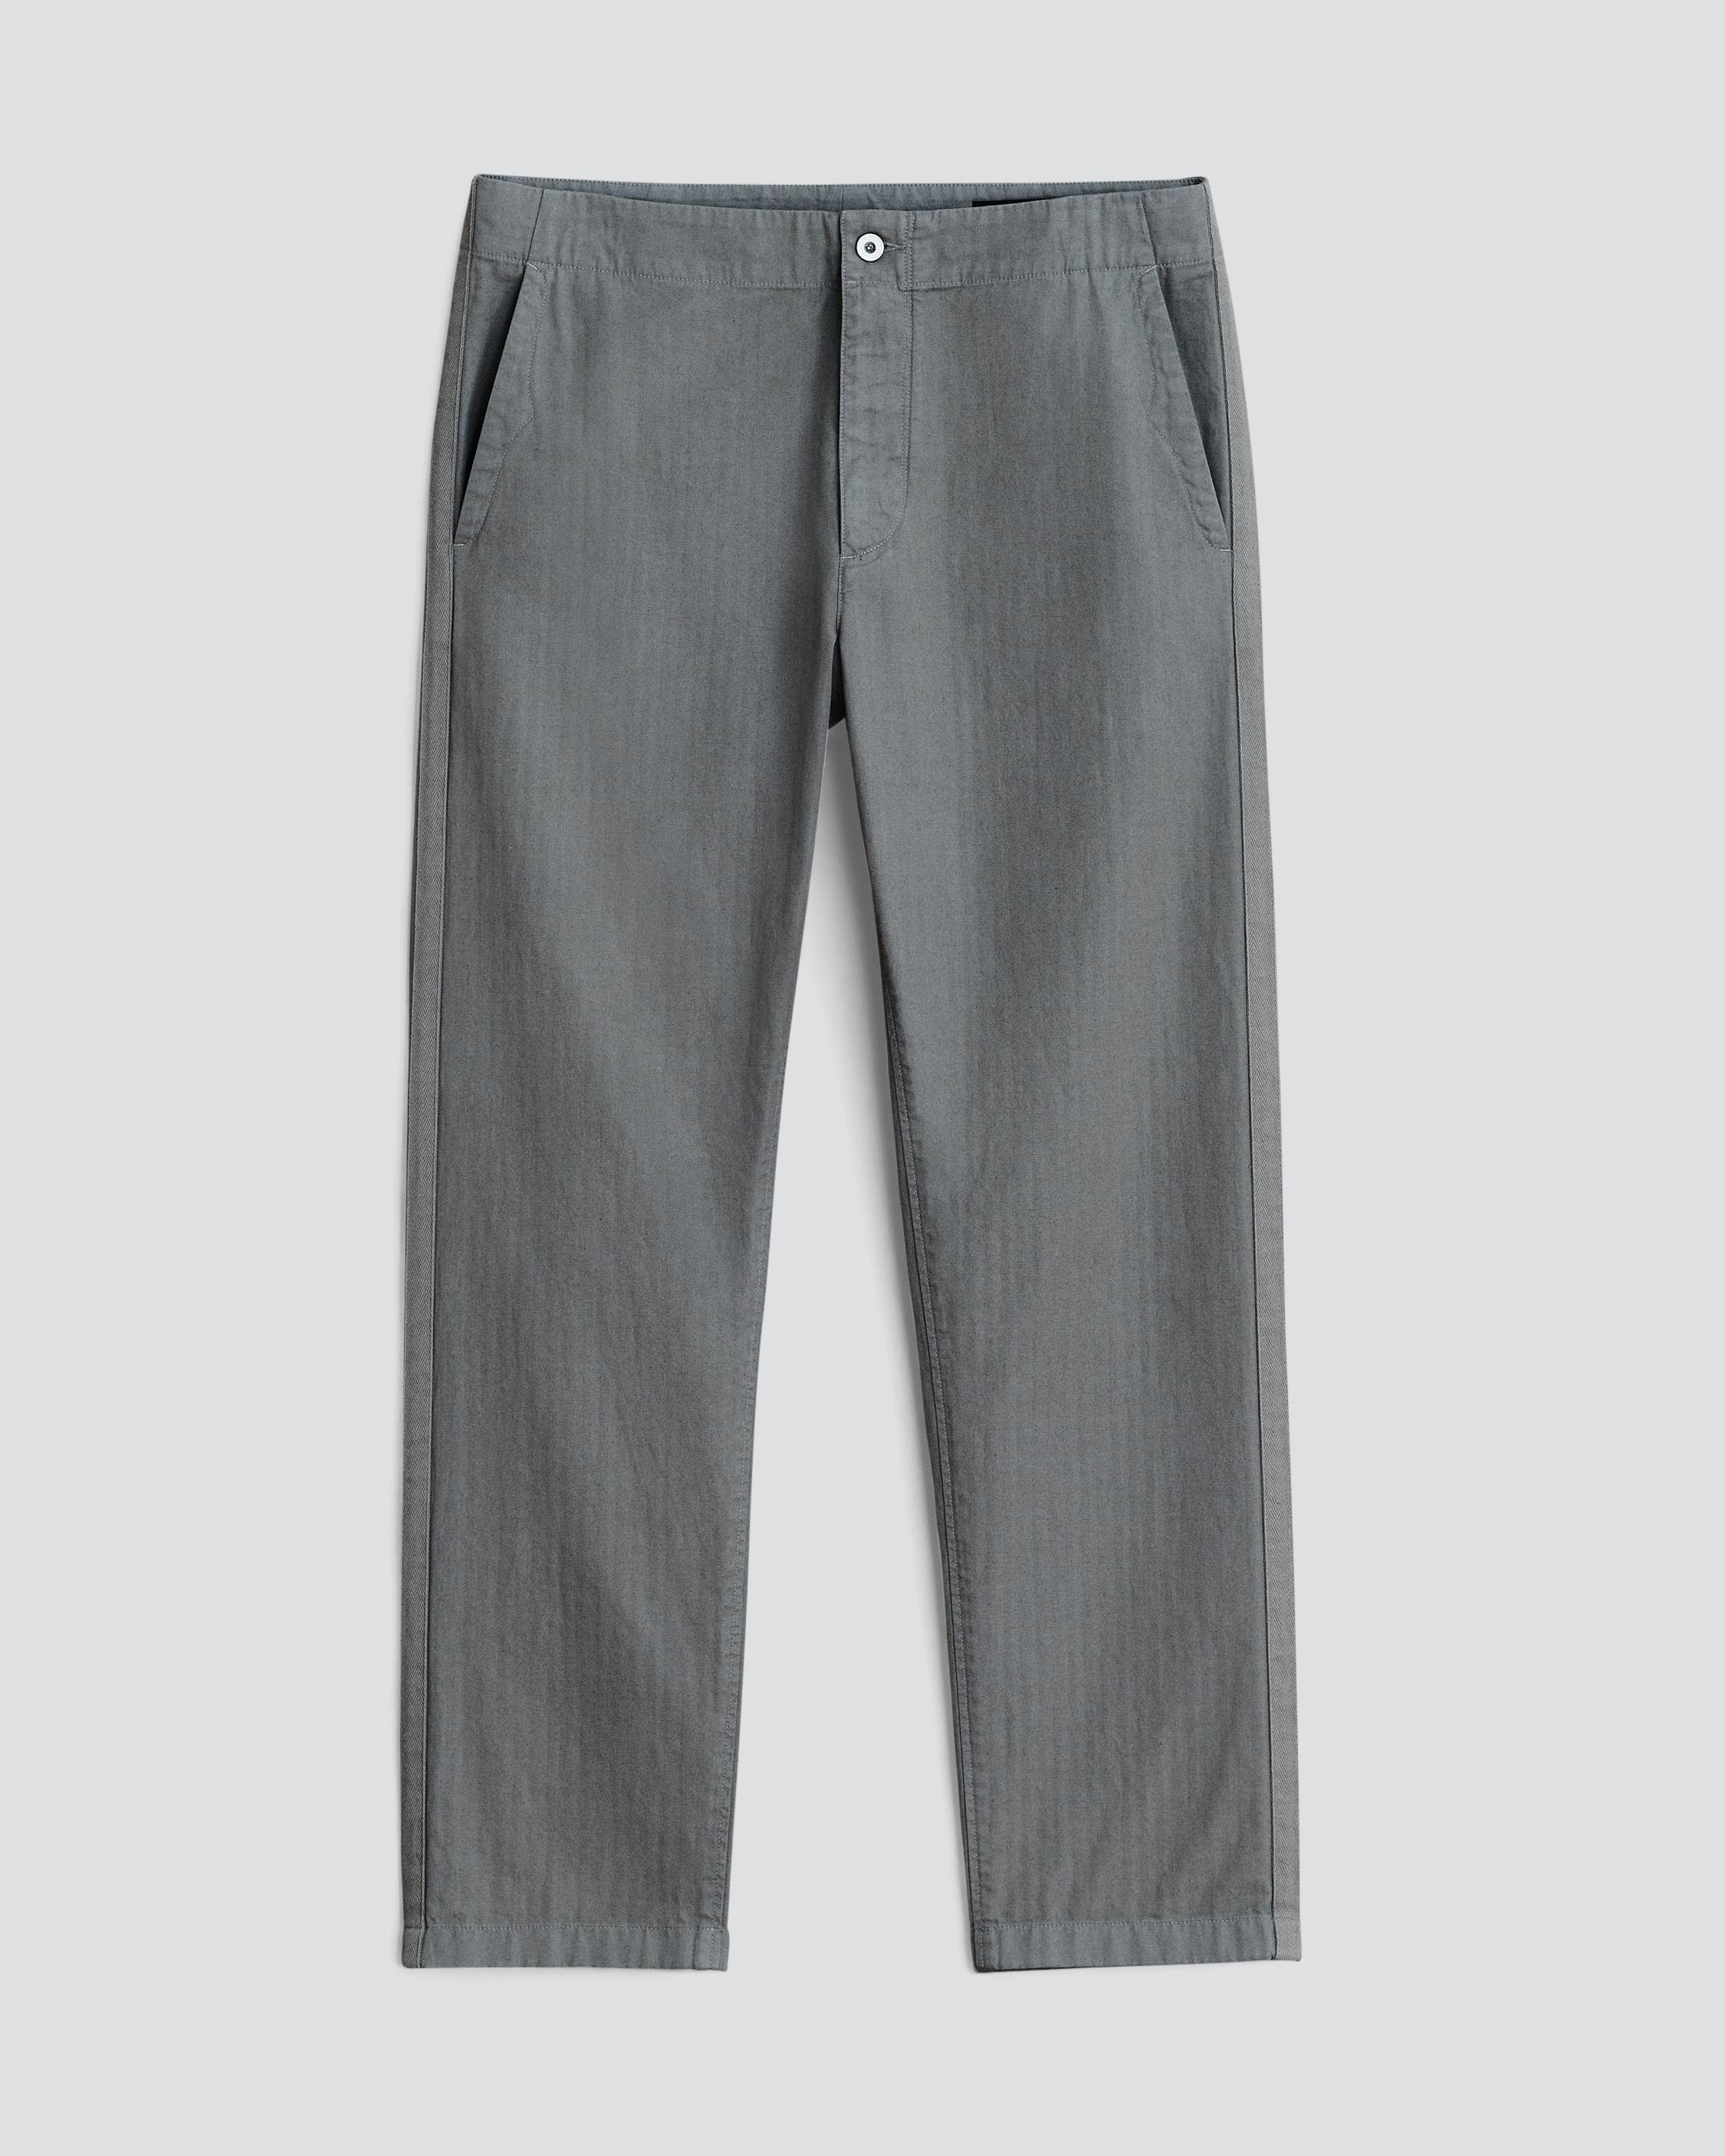 Brighton Cotton Linen Trouser
Relaxed Fit Pant - 1